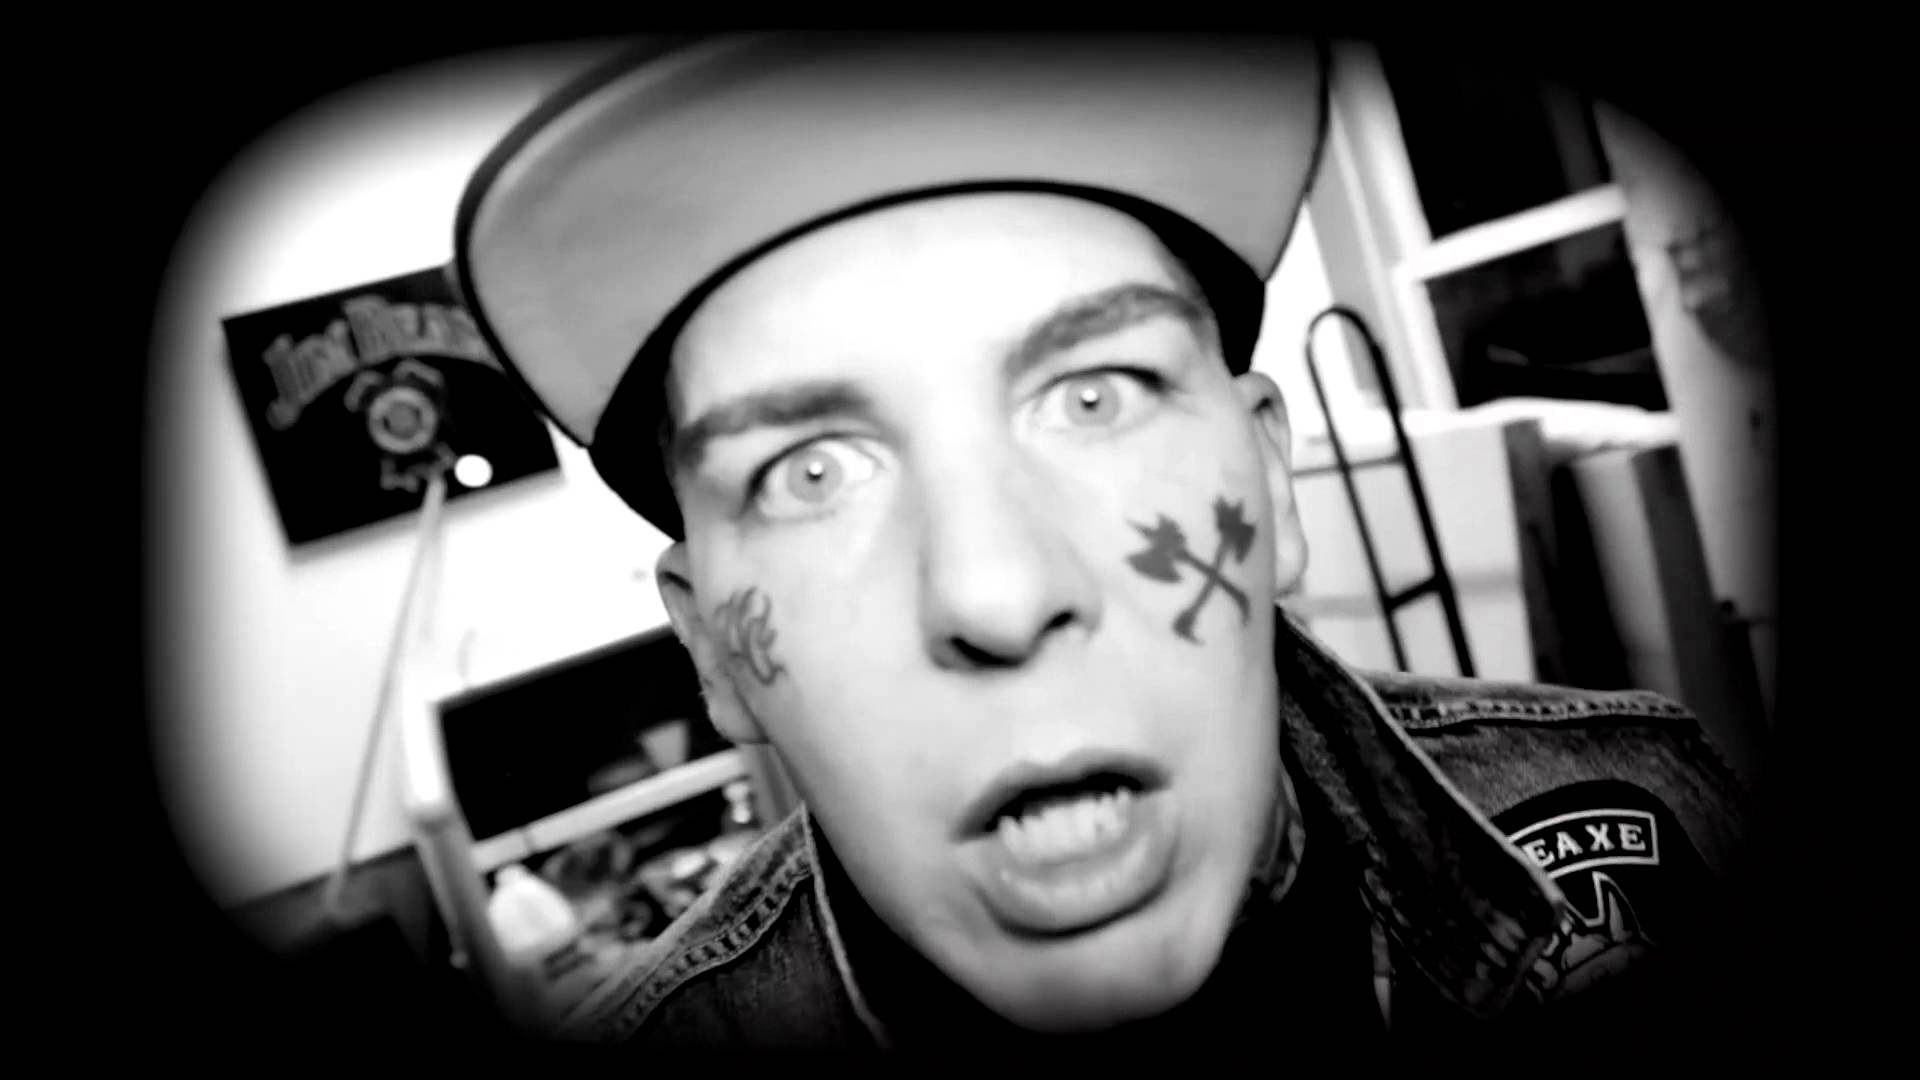 Of The Most Disturbing But Good Madchild Songs Pop Culture Spin